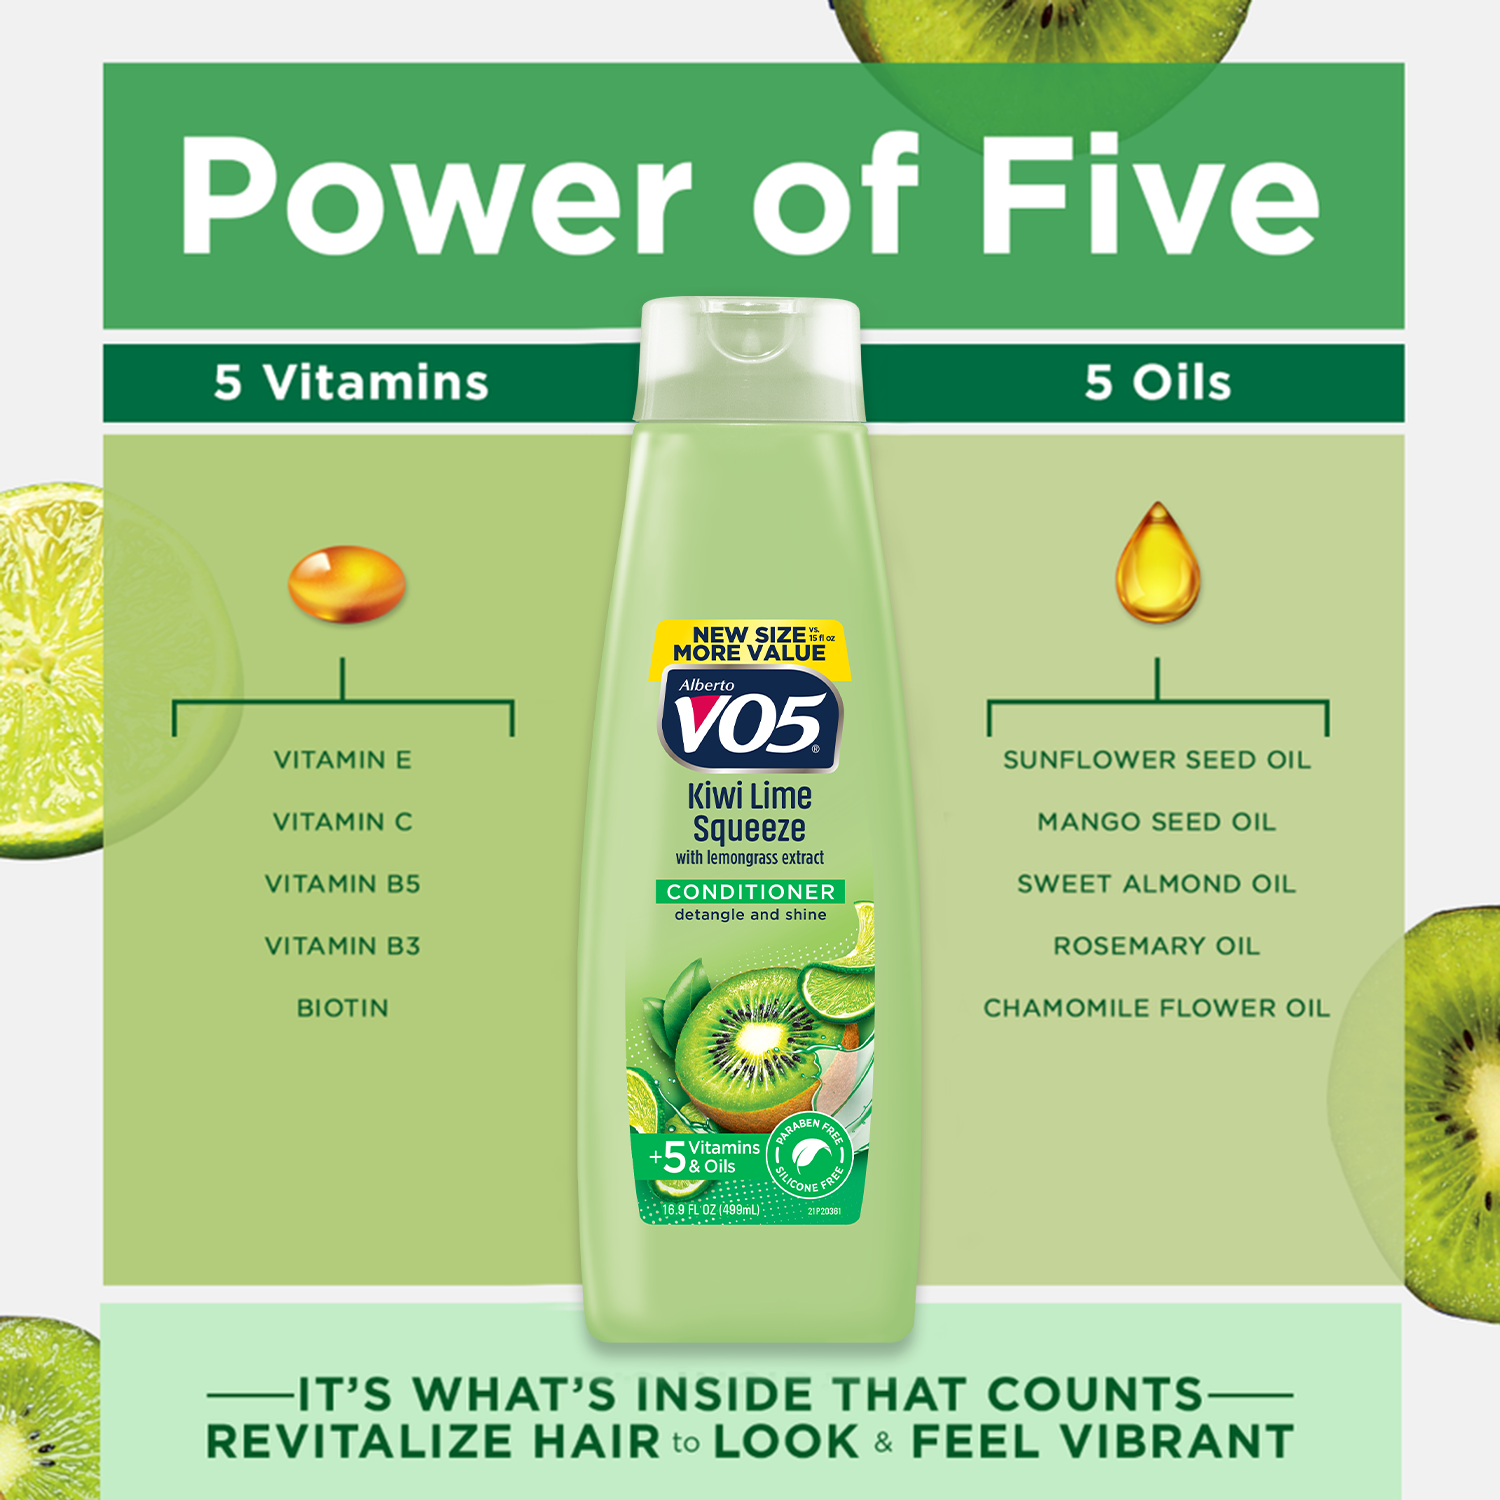 Alberto VO5 Kiwi Lime Squeeze Conditioner with Vitamin E & C, for All Hair Types, 16.9 fl oz - image 4 of 6